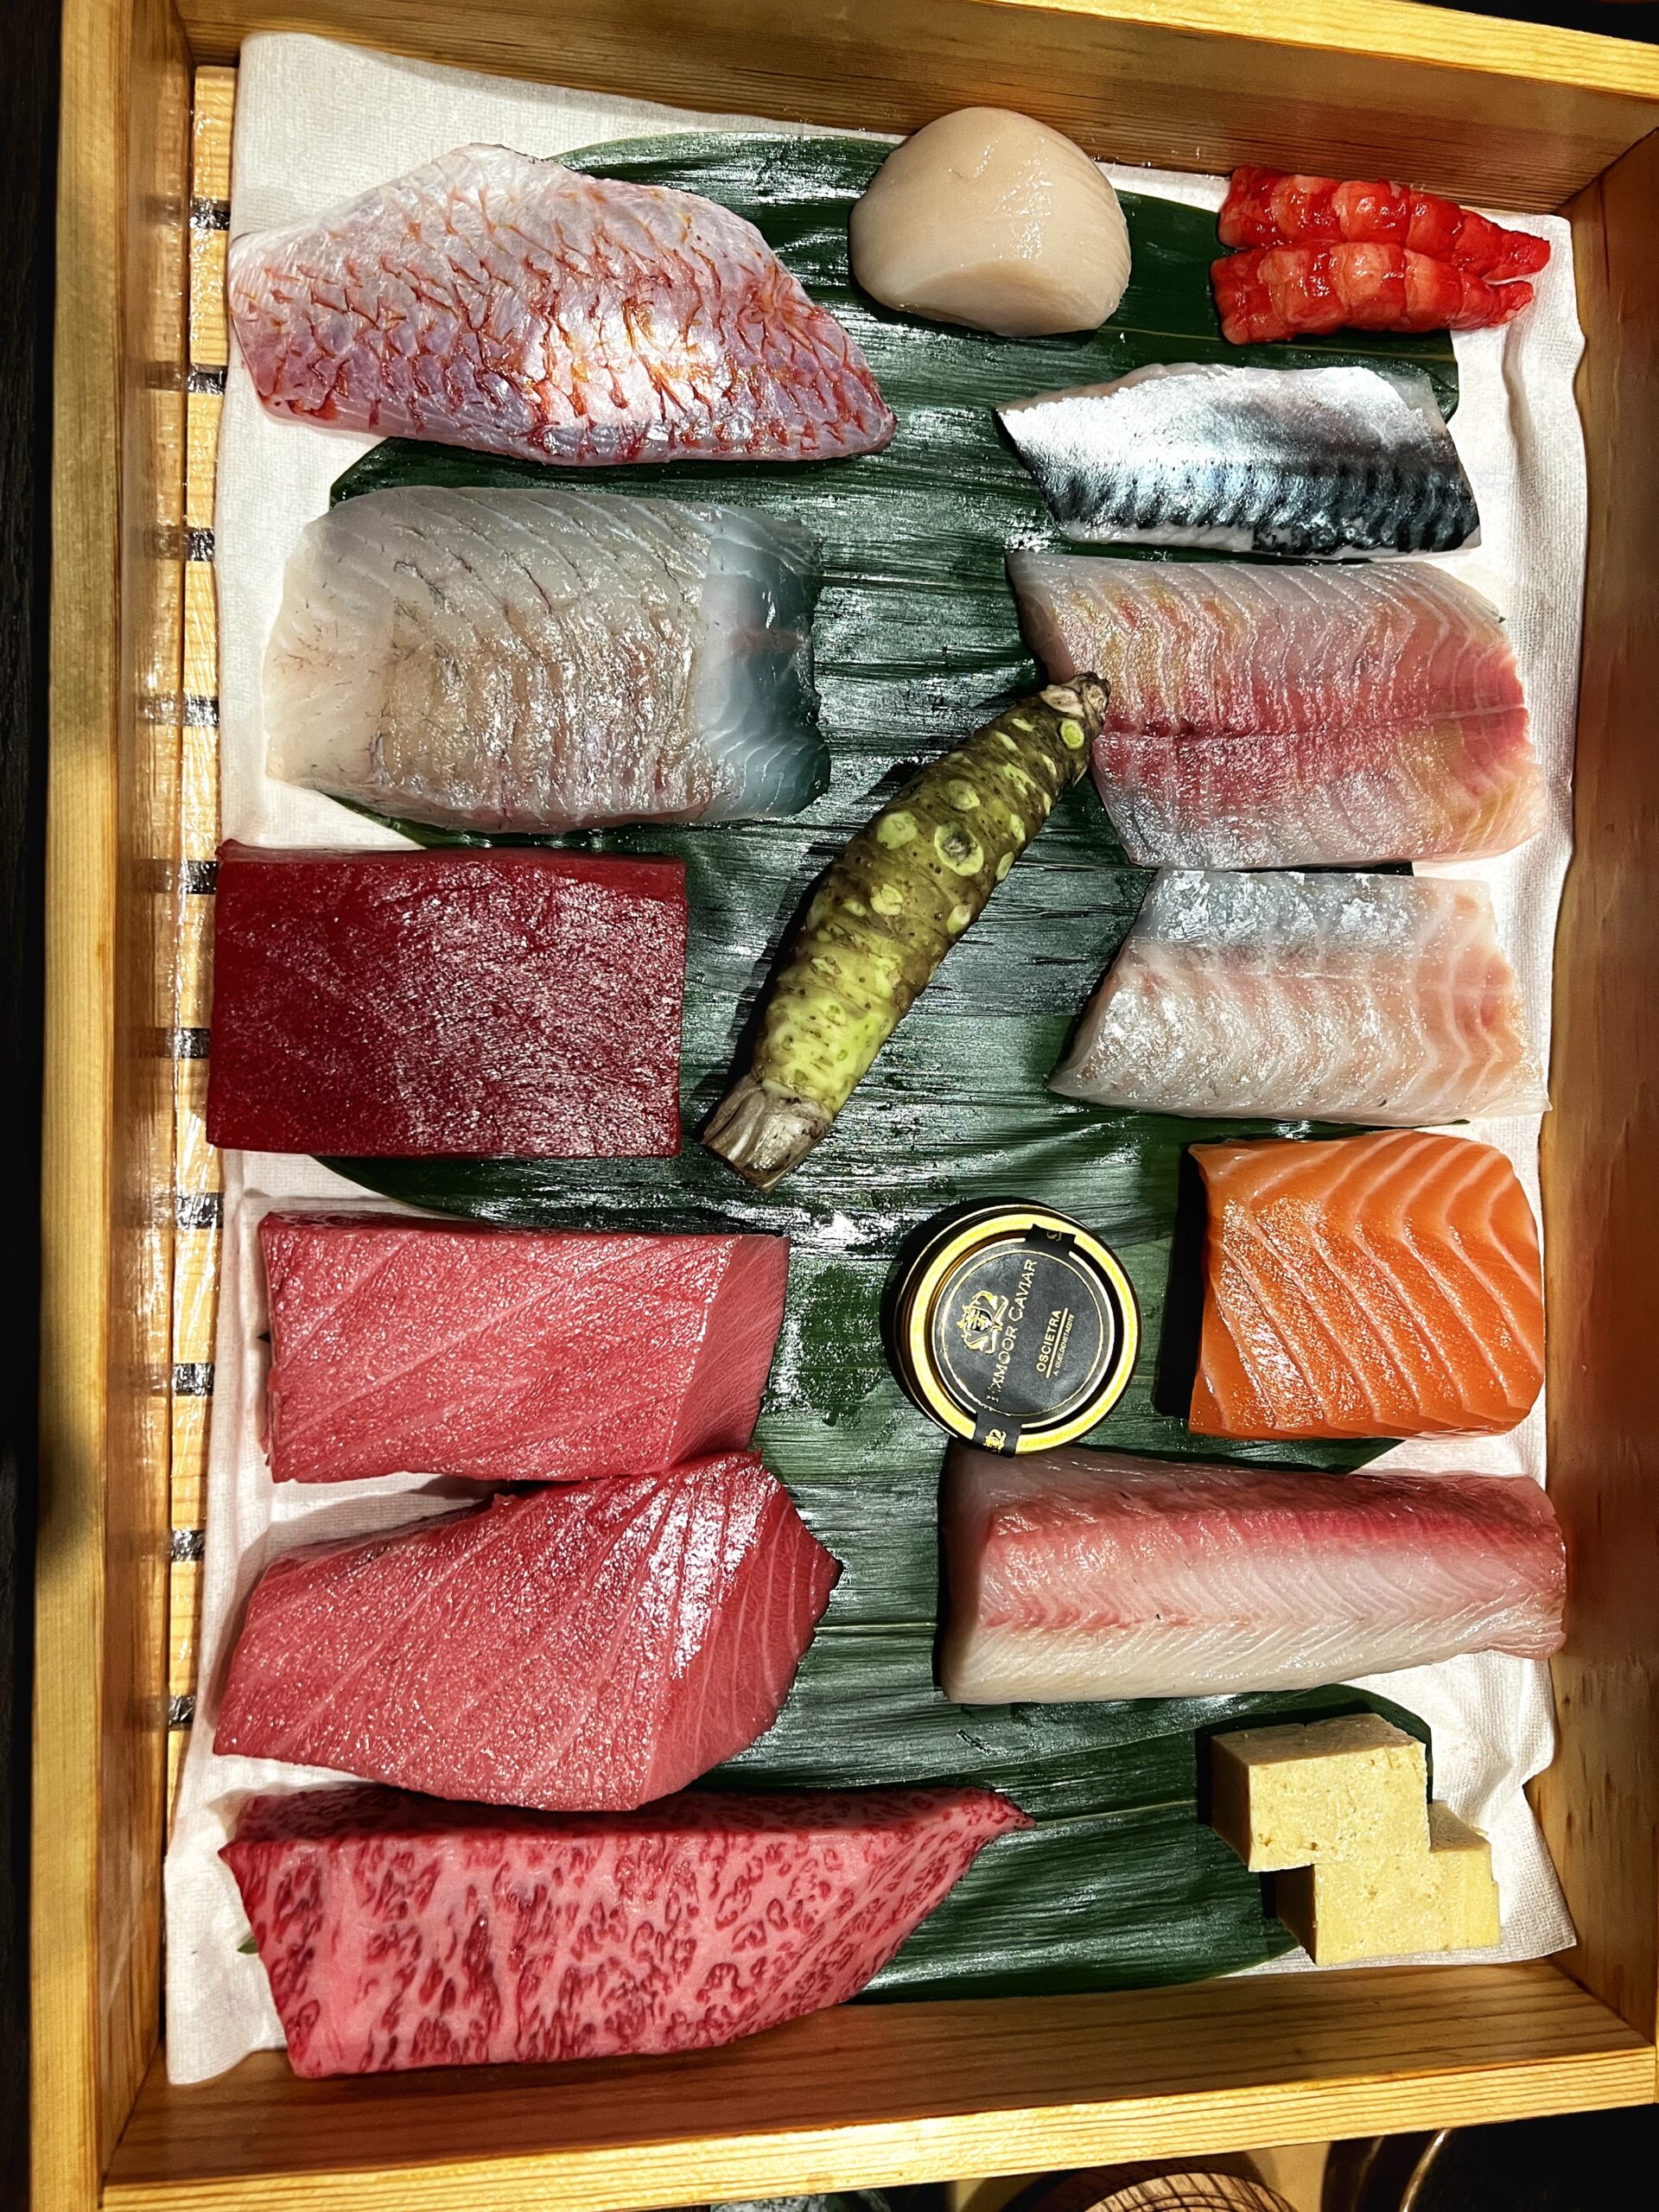 The day's Omakase ingredients are presented to you before you eat